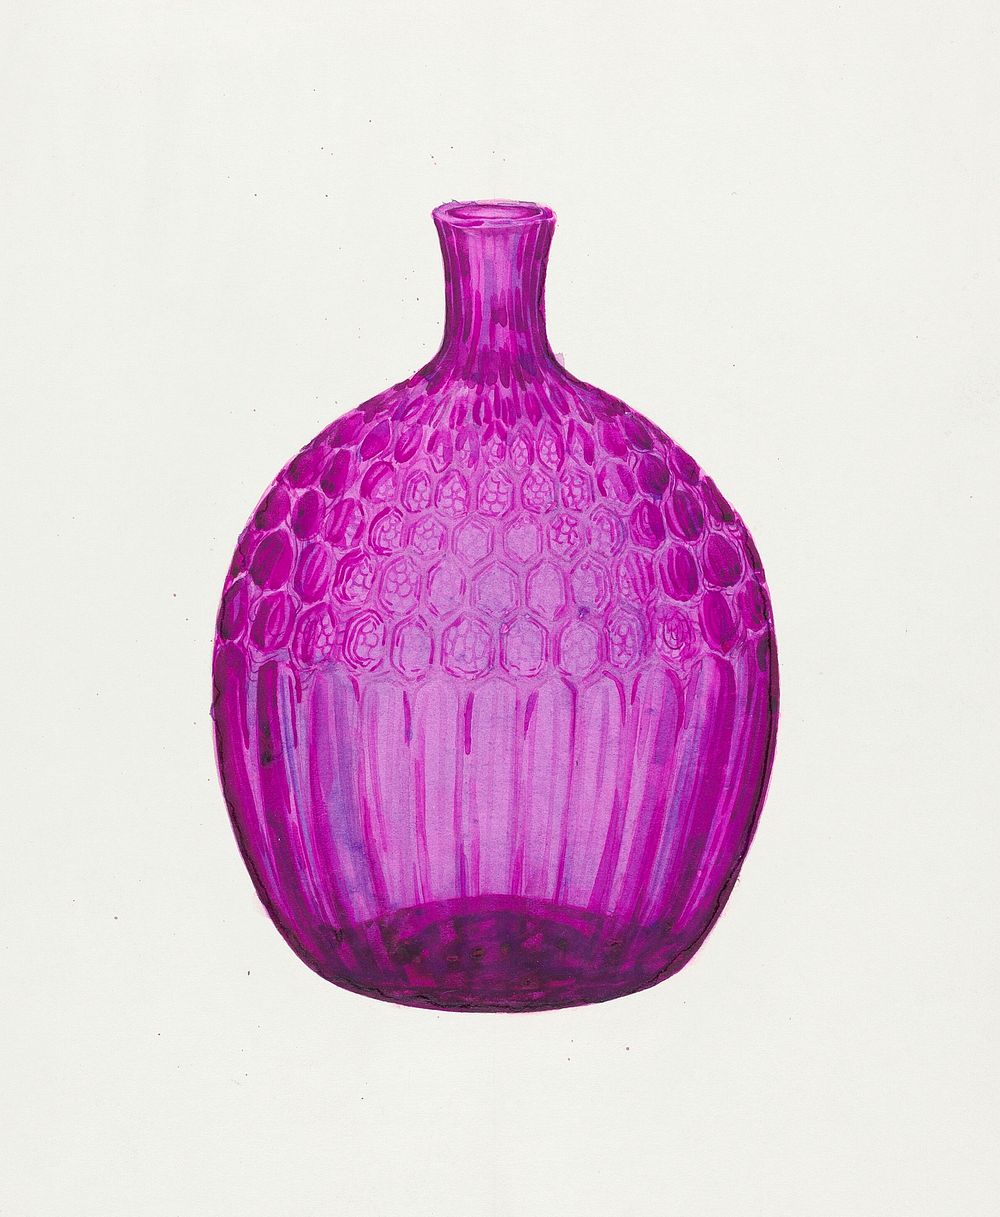 Flask (ca. 1940) by John Dana. Original from The National Gallery of Art. Digitally enhanced by rawpixel.